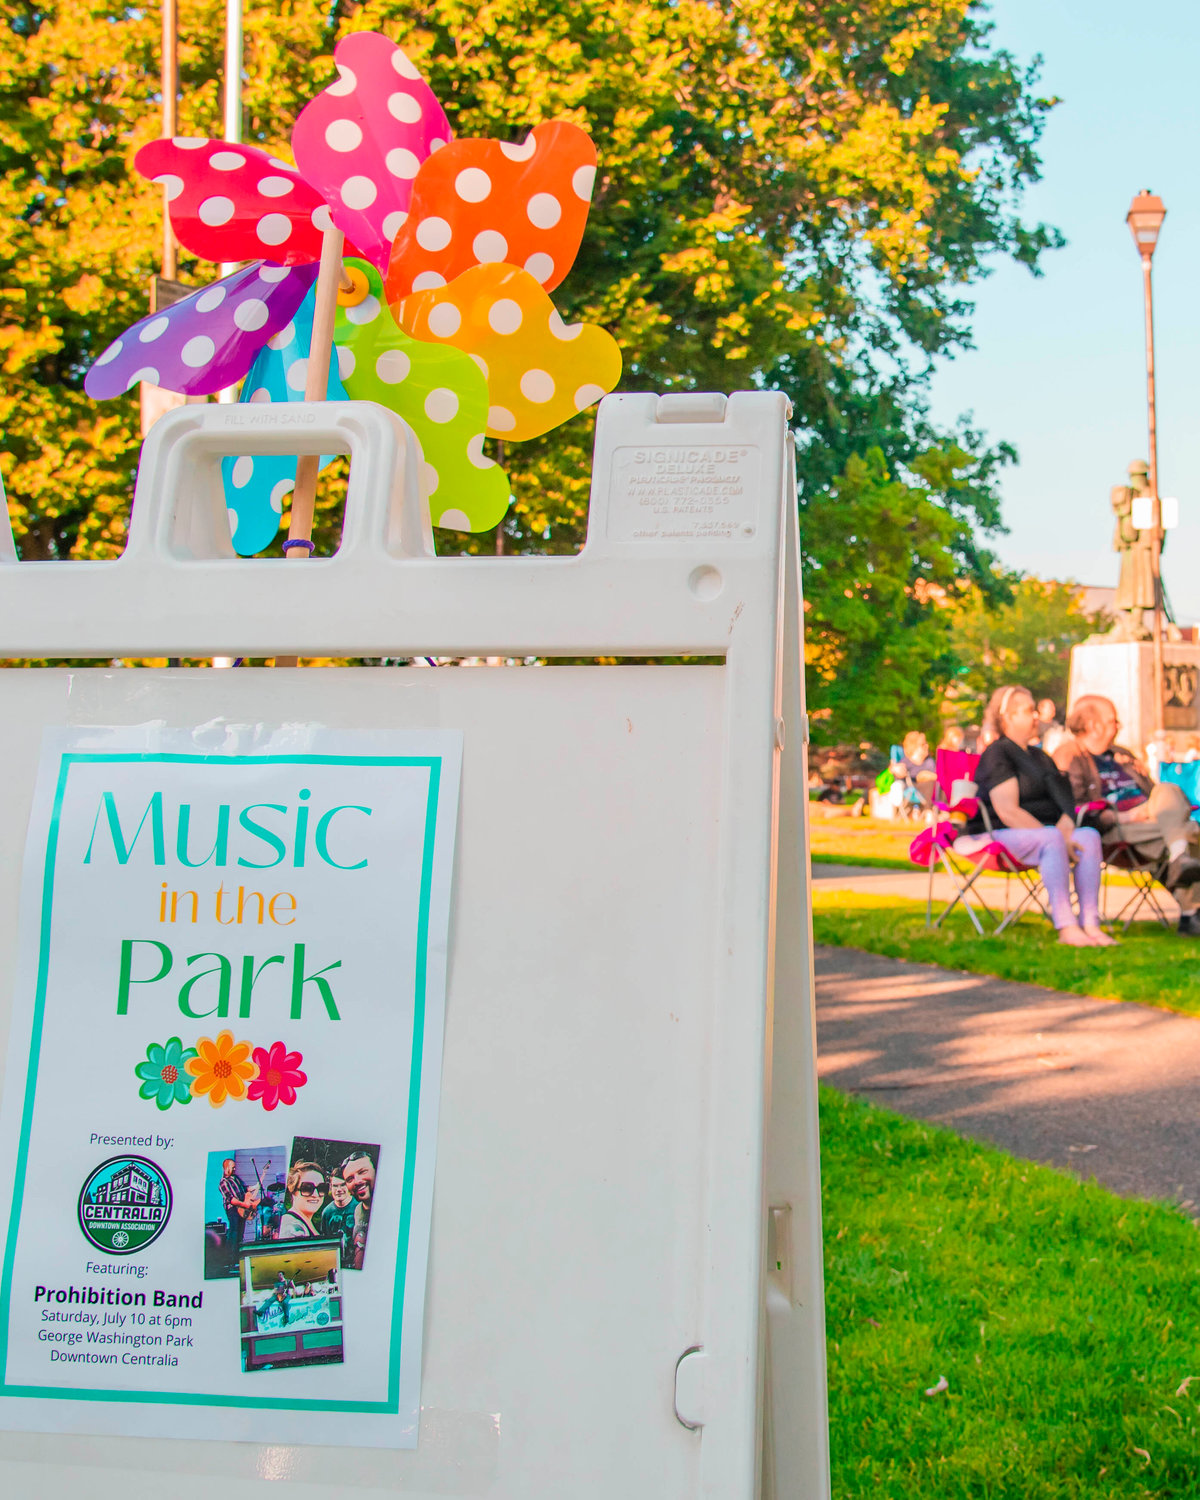 Signage for “Music in the Park” presented by the Centralia Downtown Association is on display Saturday in George Washington Park during an event.